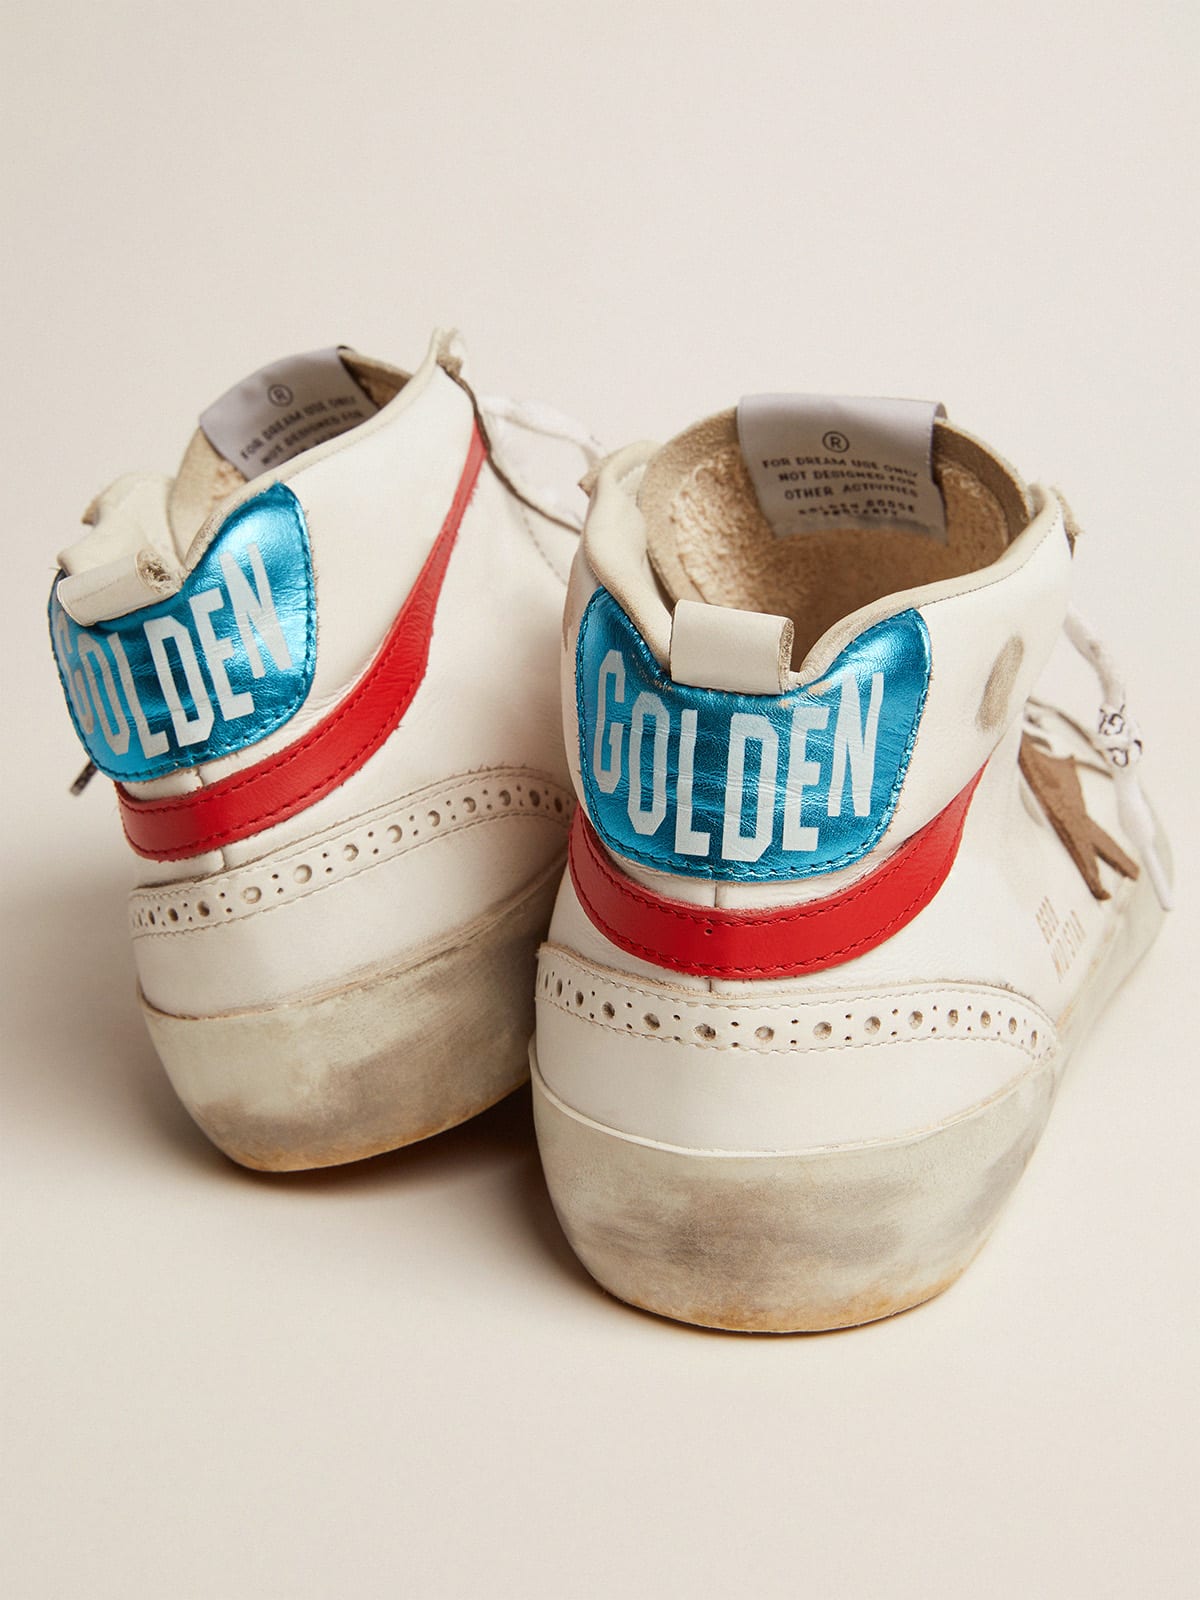 Mid Star sneakers with metallic light blue heel tab and crackled khaki star  | Golden Goose